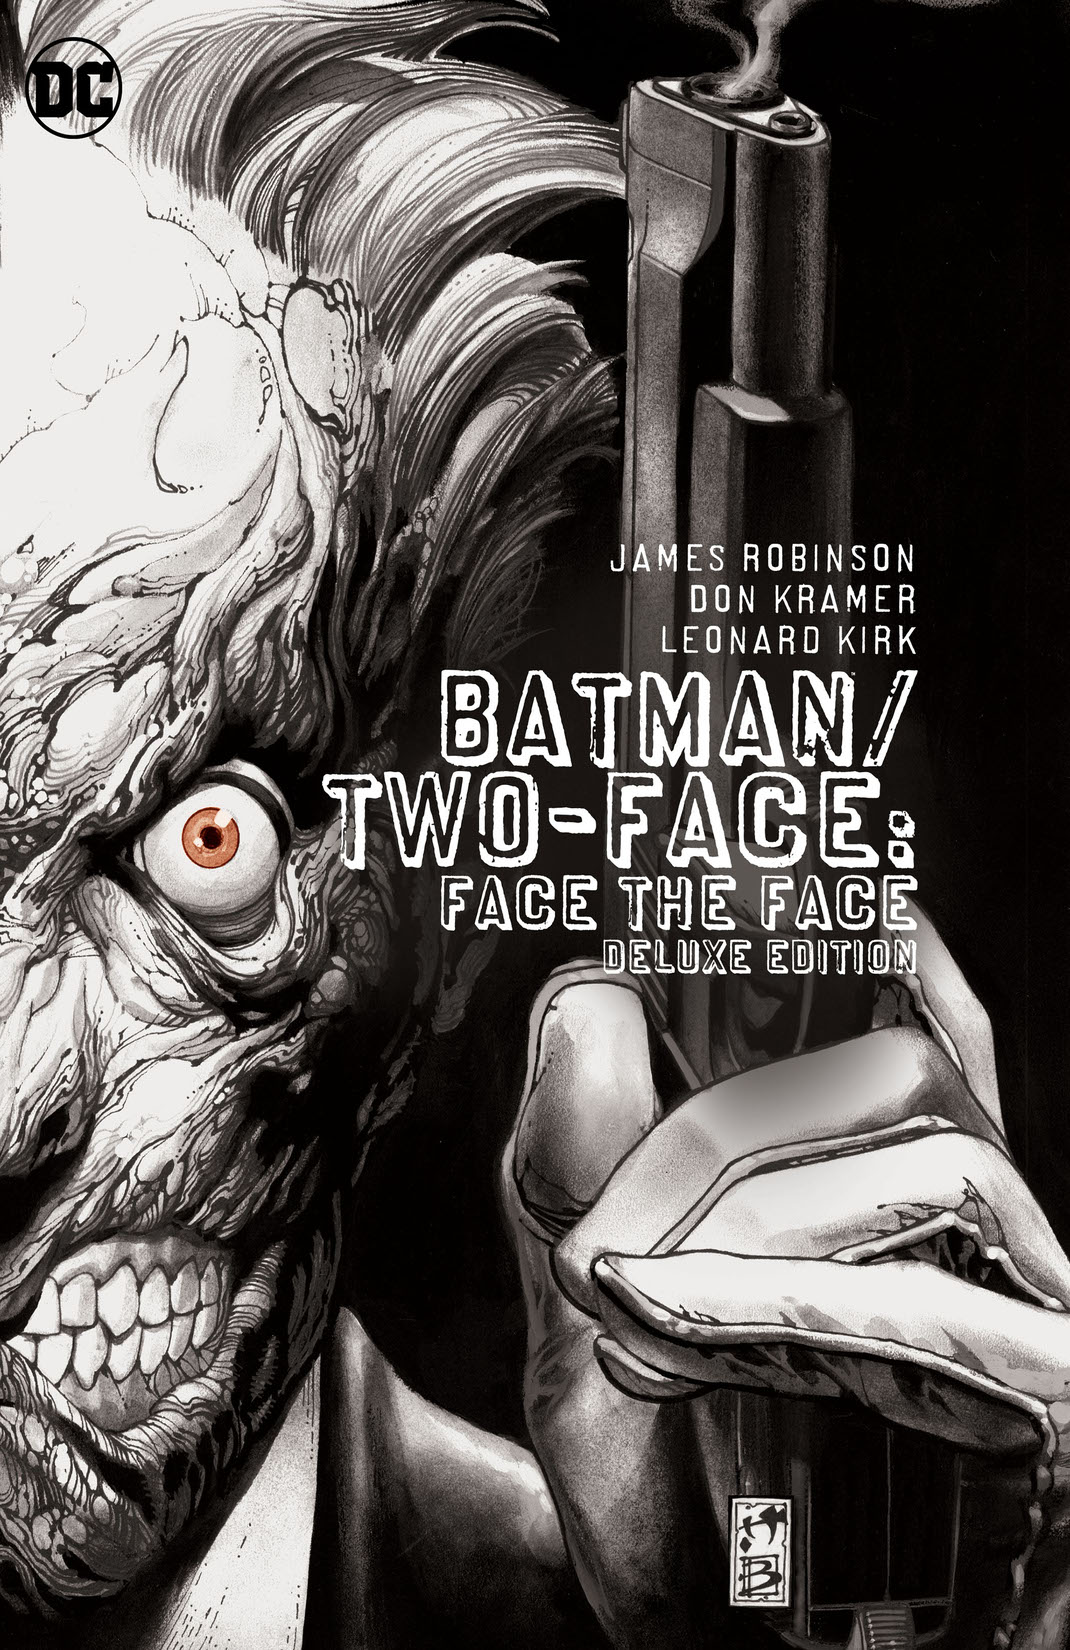 Batman/Two-Face: Face the Face Deluxe Edition preview images